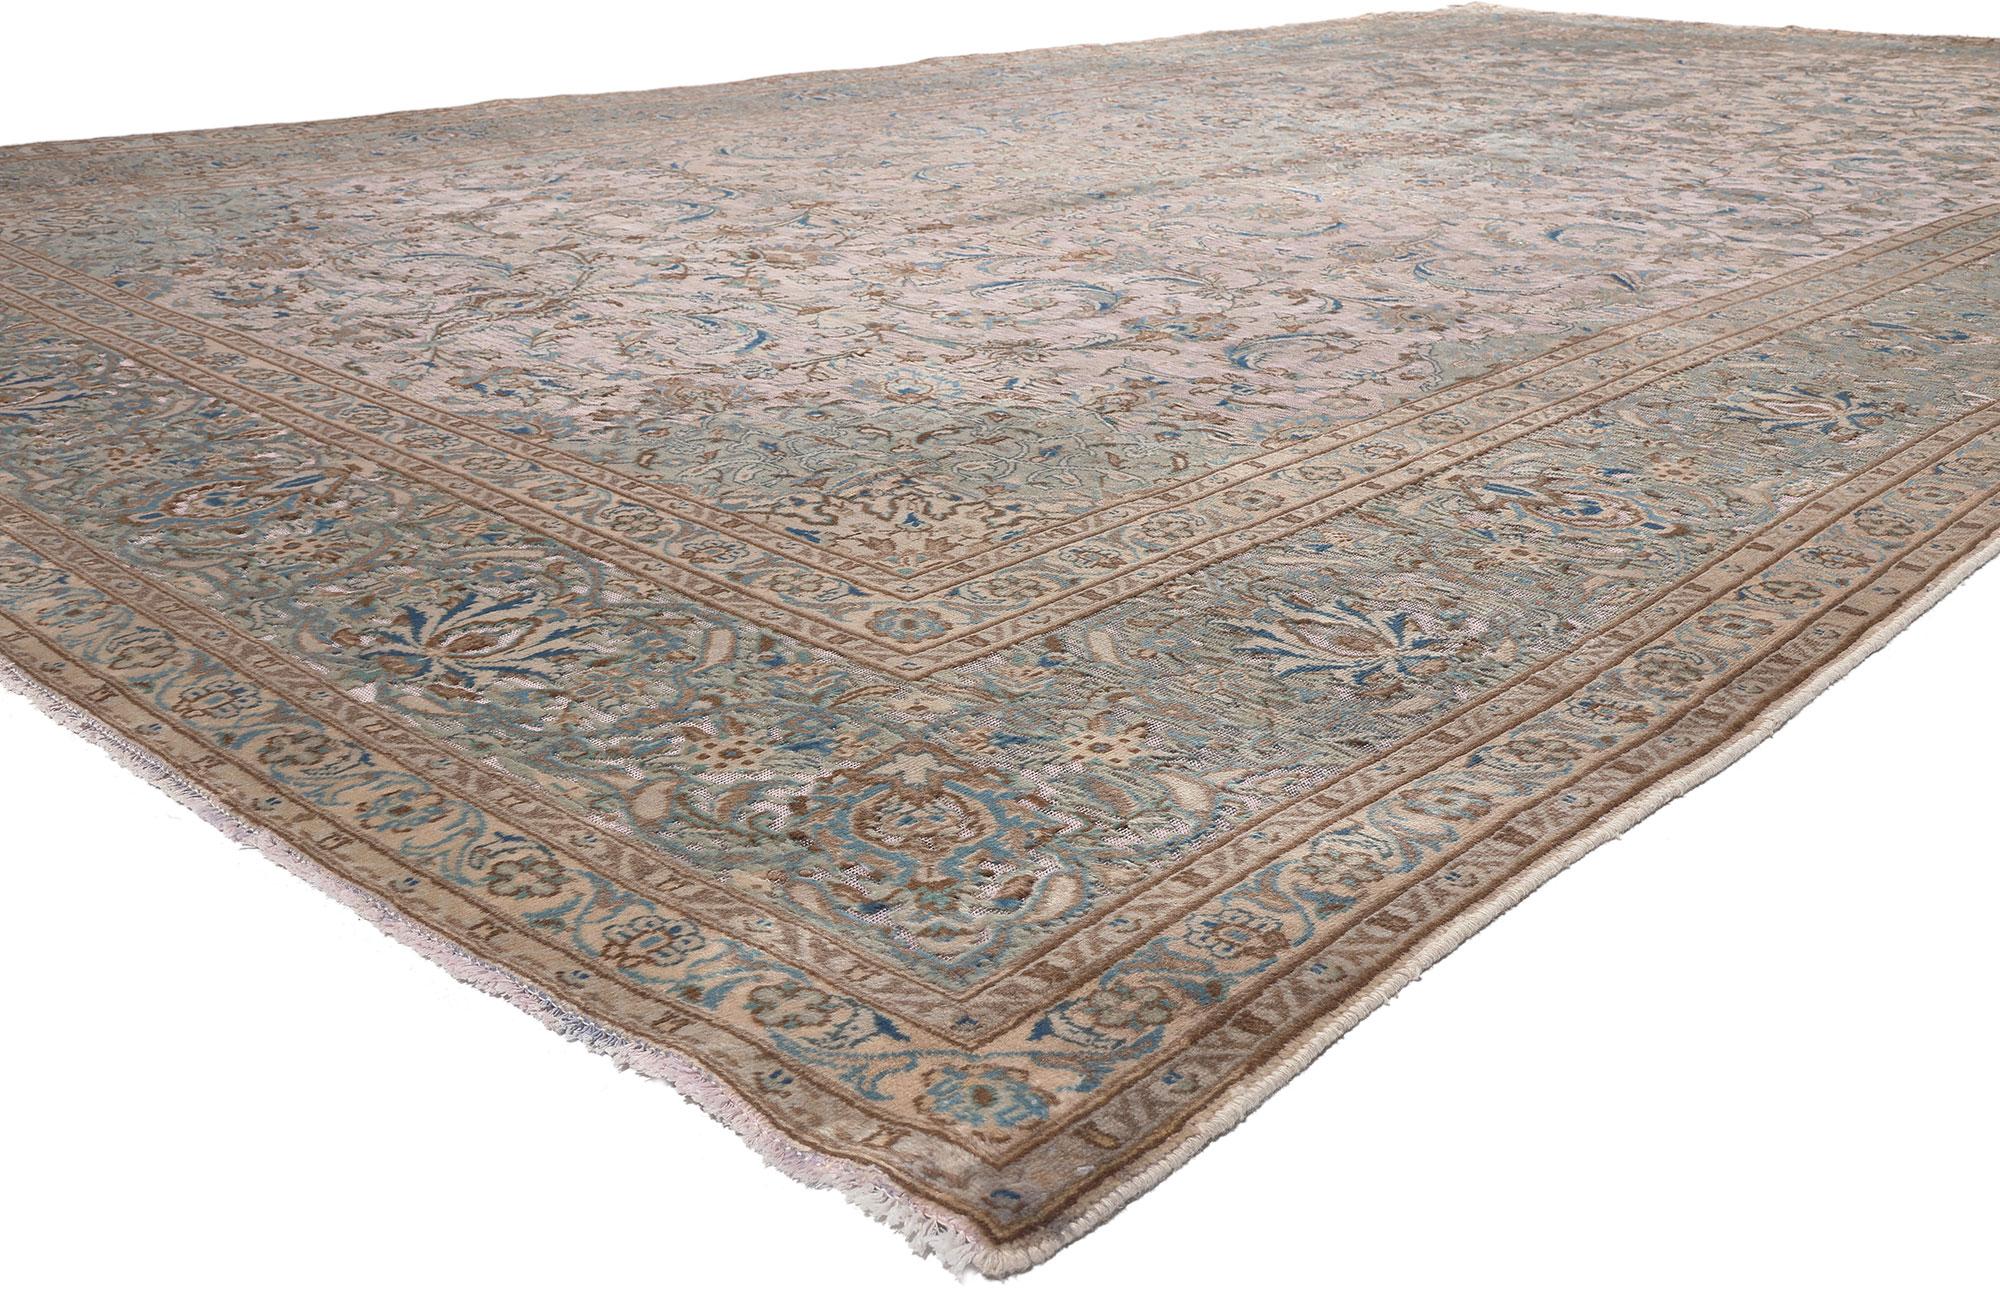 78589 hand carved Vintage Persian Kashan Rug, 11'01 x 19'04.
Emanating nostalgic charm with incredible detail and texture, this hand carved vintage Persian Kashan rug is poised to impress. The decorative all over pattern and soft pastel earth-tone